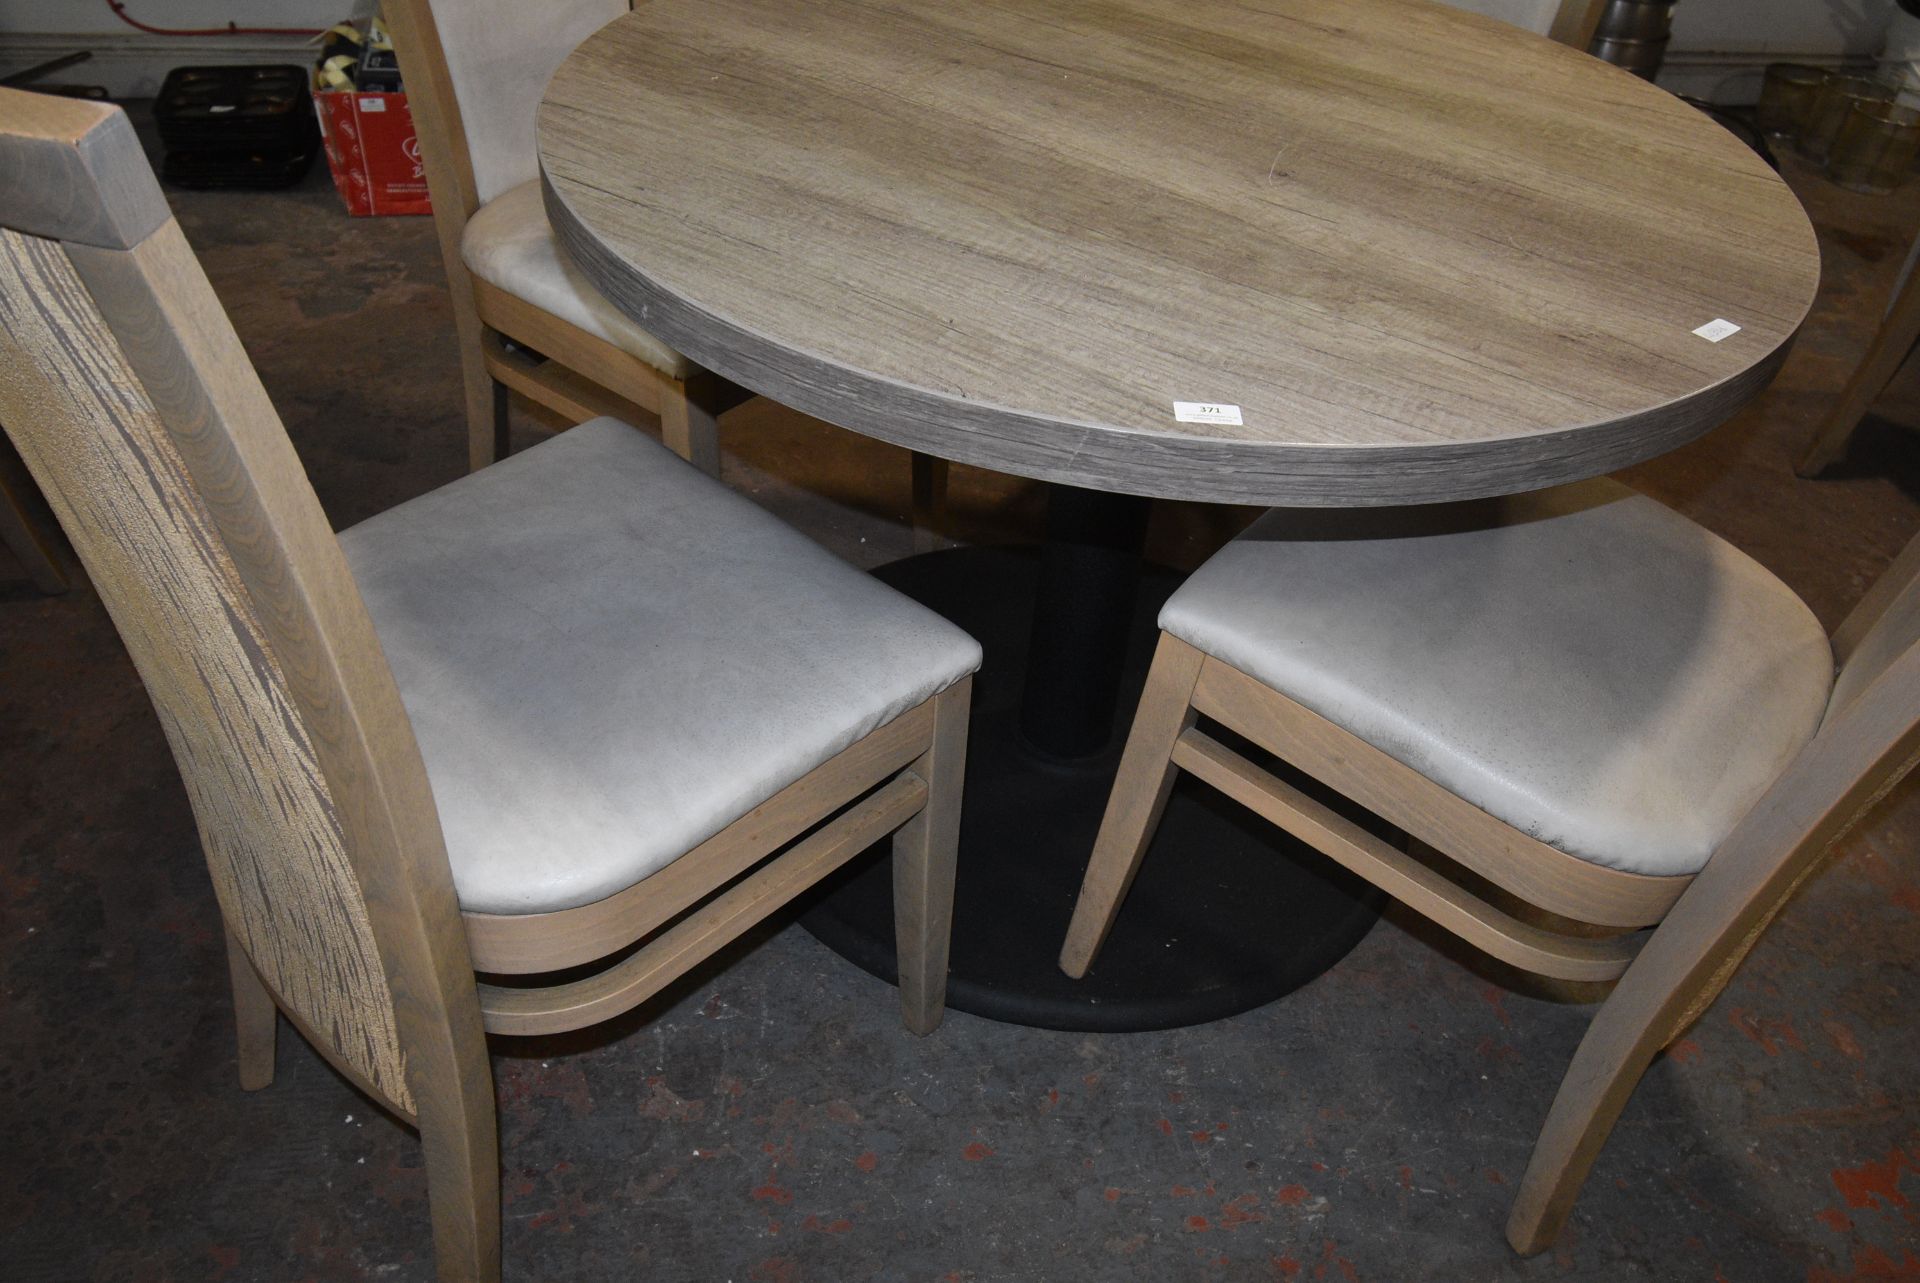 100cm Circular Single Pedestal Table with Four Chairs - Image 2 of 3